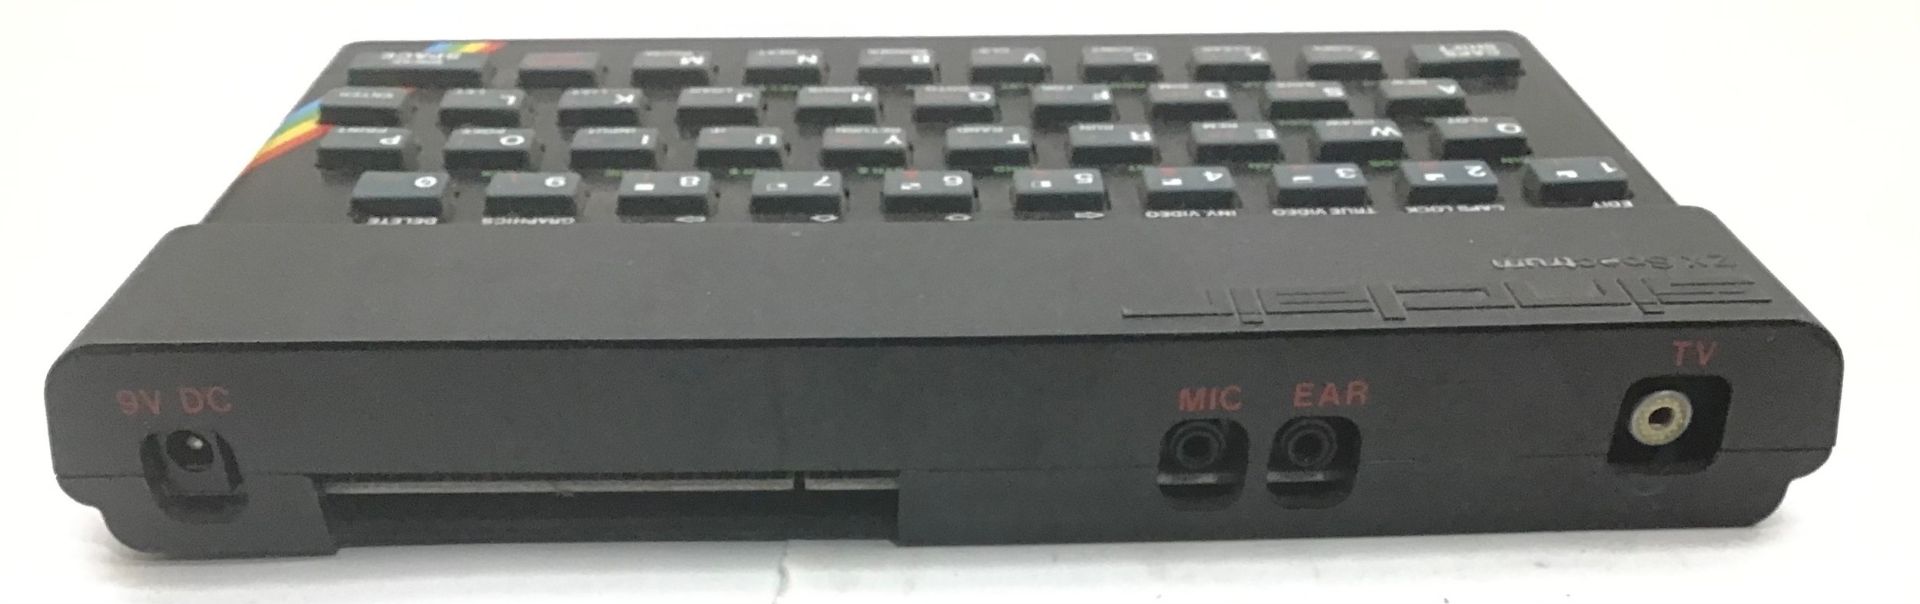 ZX SPECTRUM GAMES COMPUTER. Made by Spectrum in 1982 complete with leads and power supply. Also - Image 2 of 2